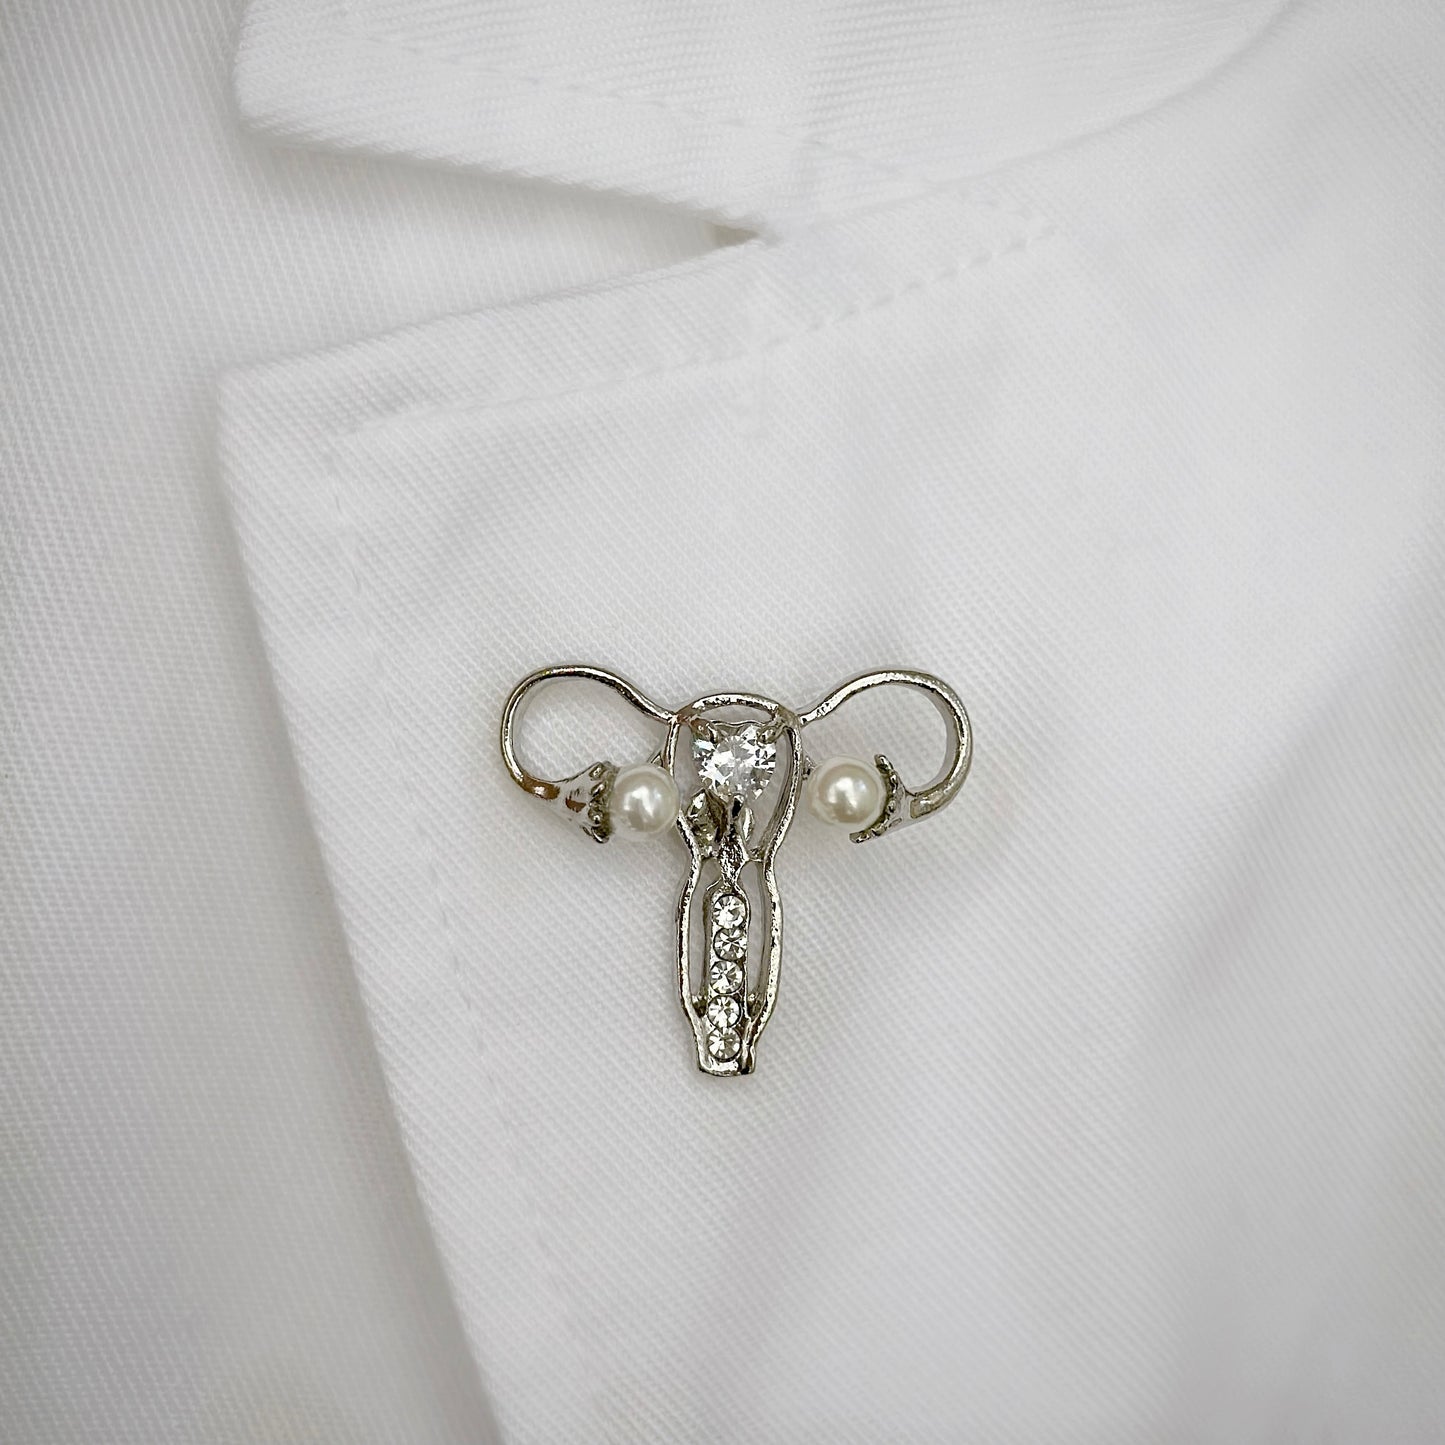 Uterus Medical pin, Gynecology, FNP, Womens Health, Obstetrics, Obstetrician, Gynecologists gift idea.